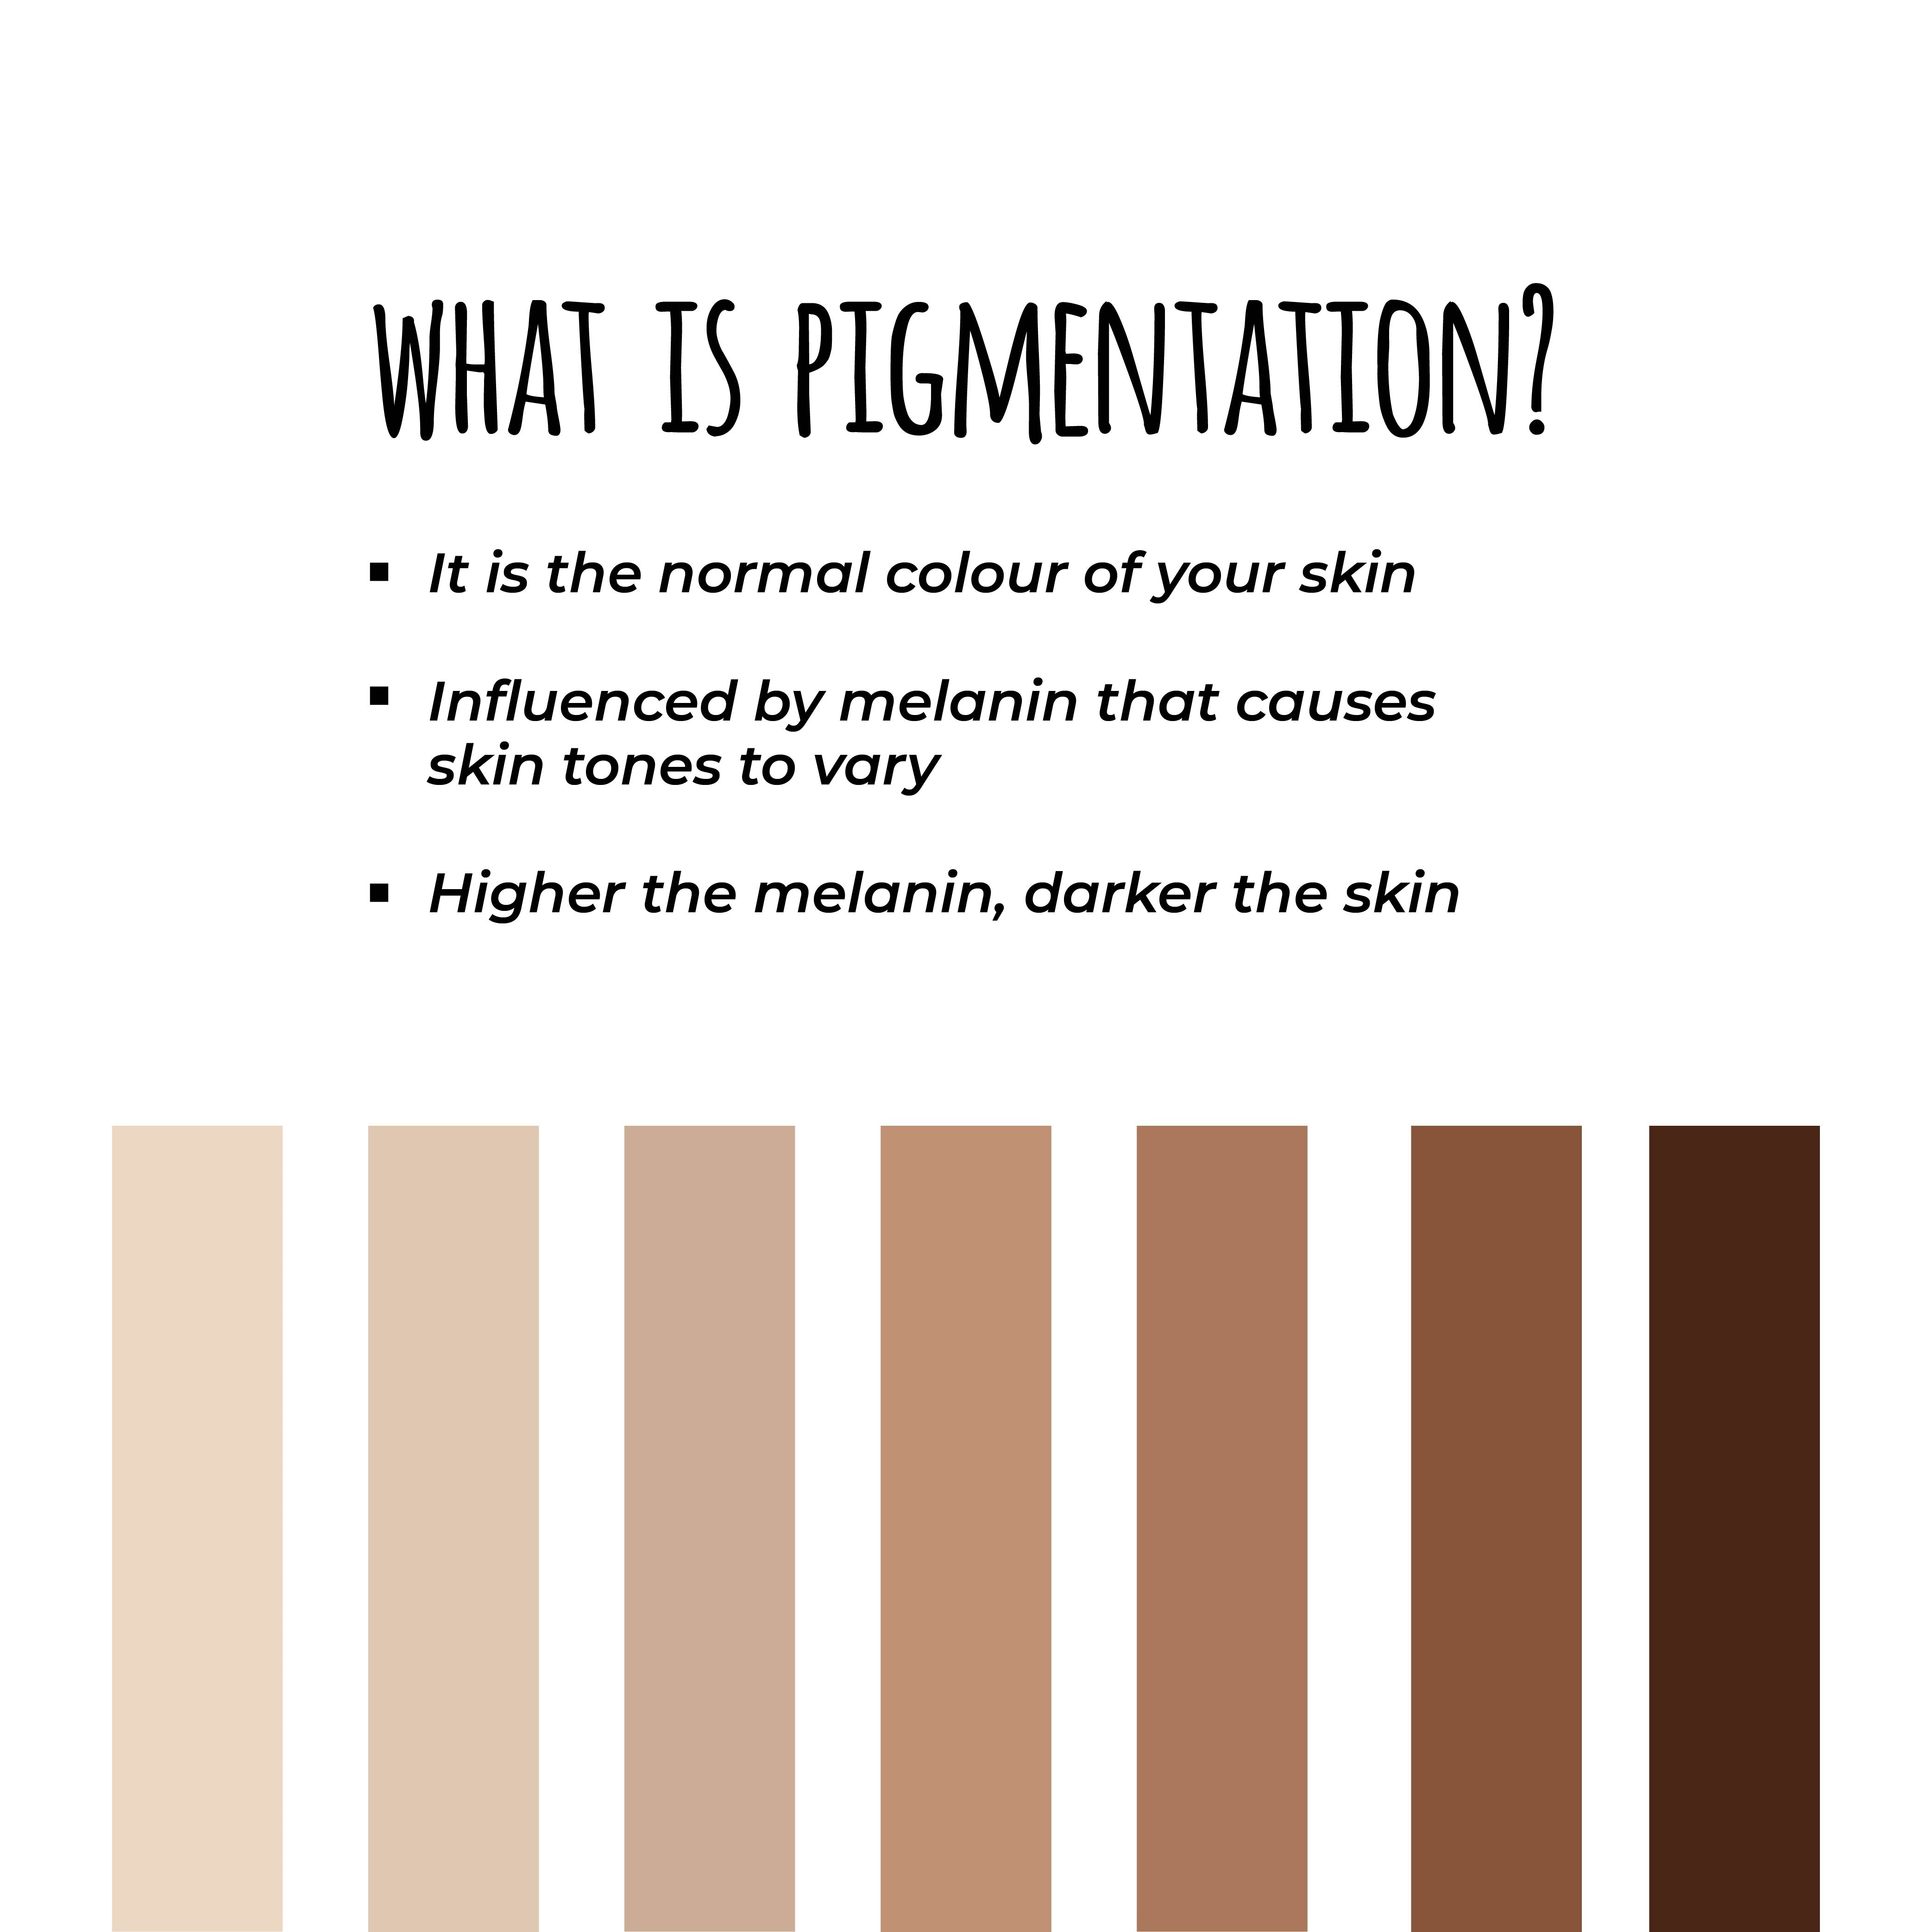 This is an image of what is pigmentation